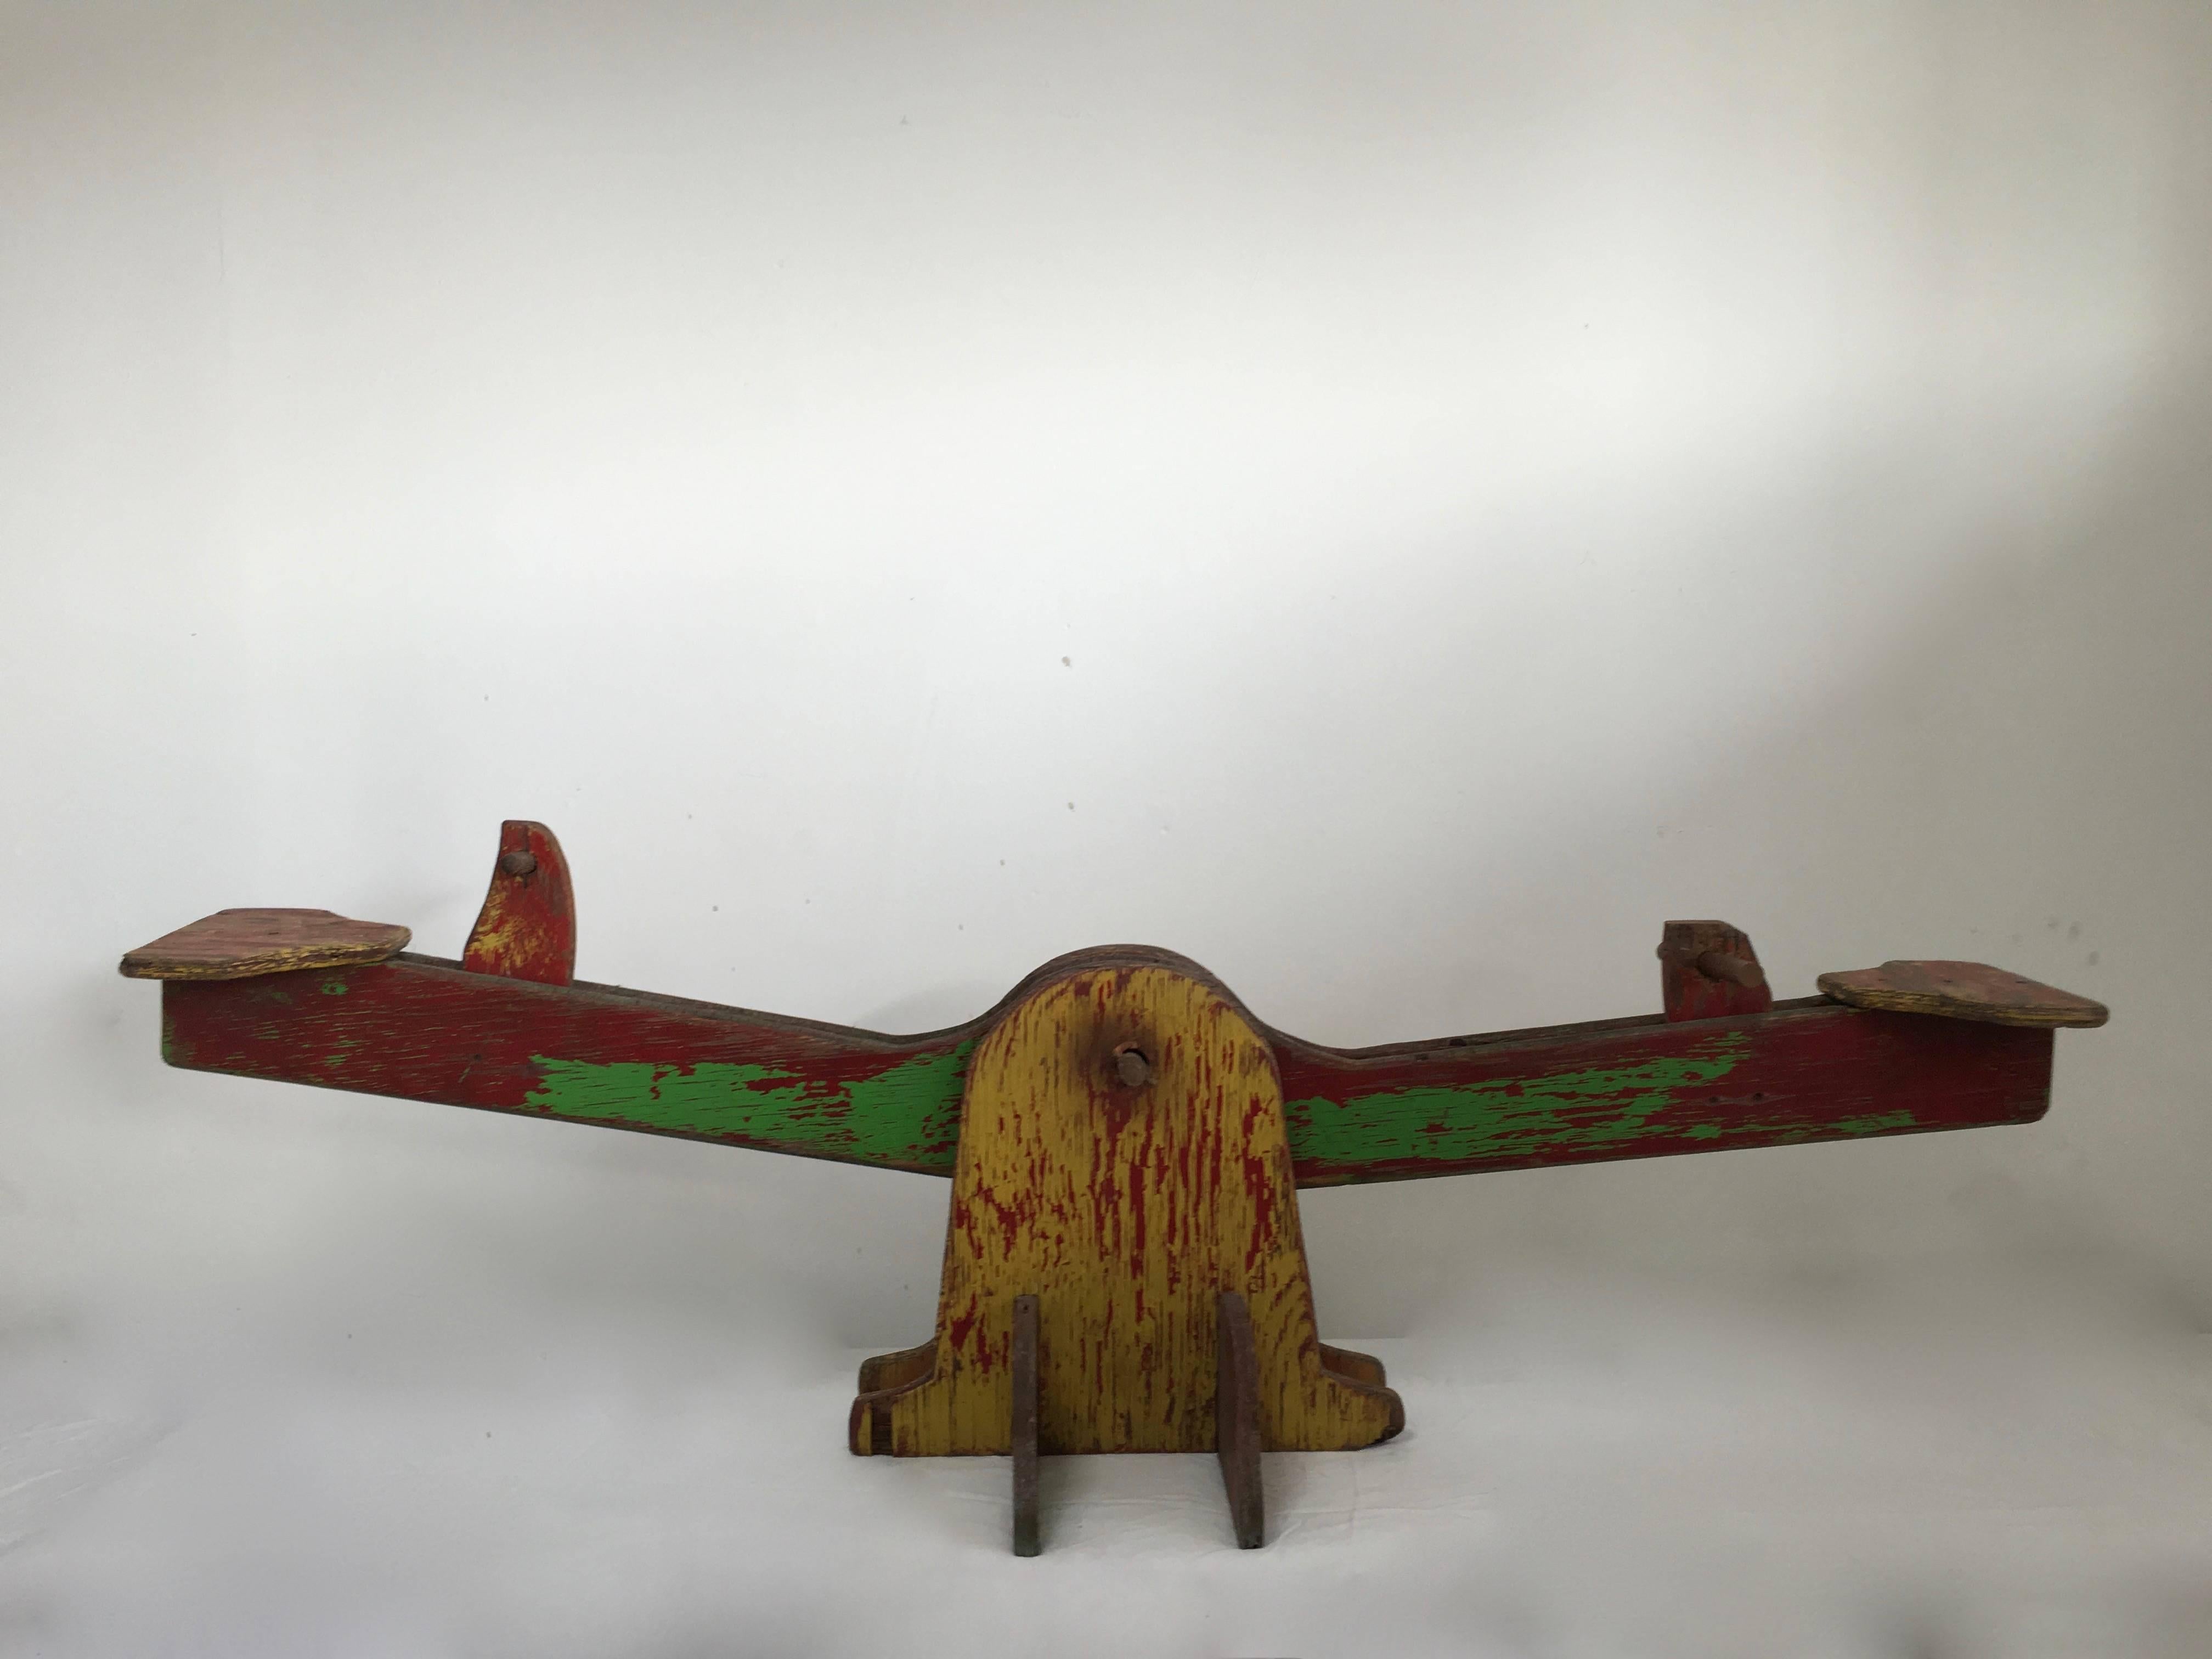 In the 1940s this child's see-saw was the go-to toy, handmade, and gathering over the years a perfect patina! Made of wood, this Folk Art piece, no longer a great practical toy, but a stunning work of art and piece of decor. 

Resting high on a